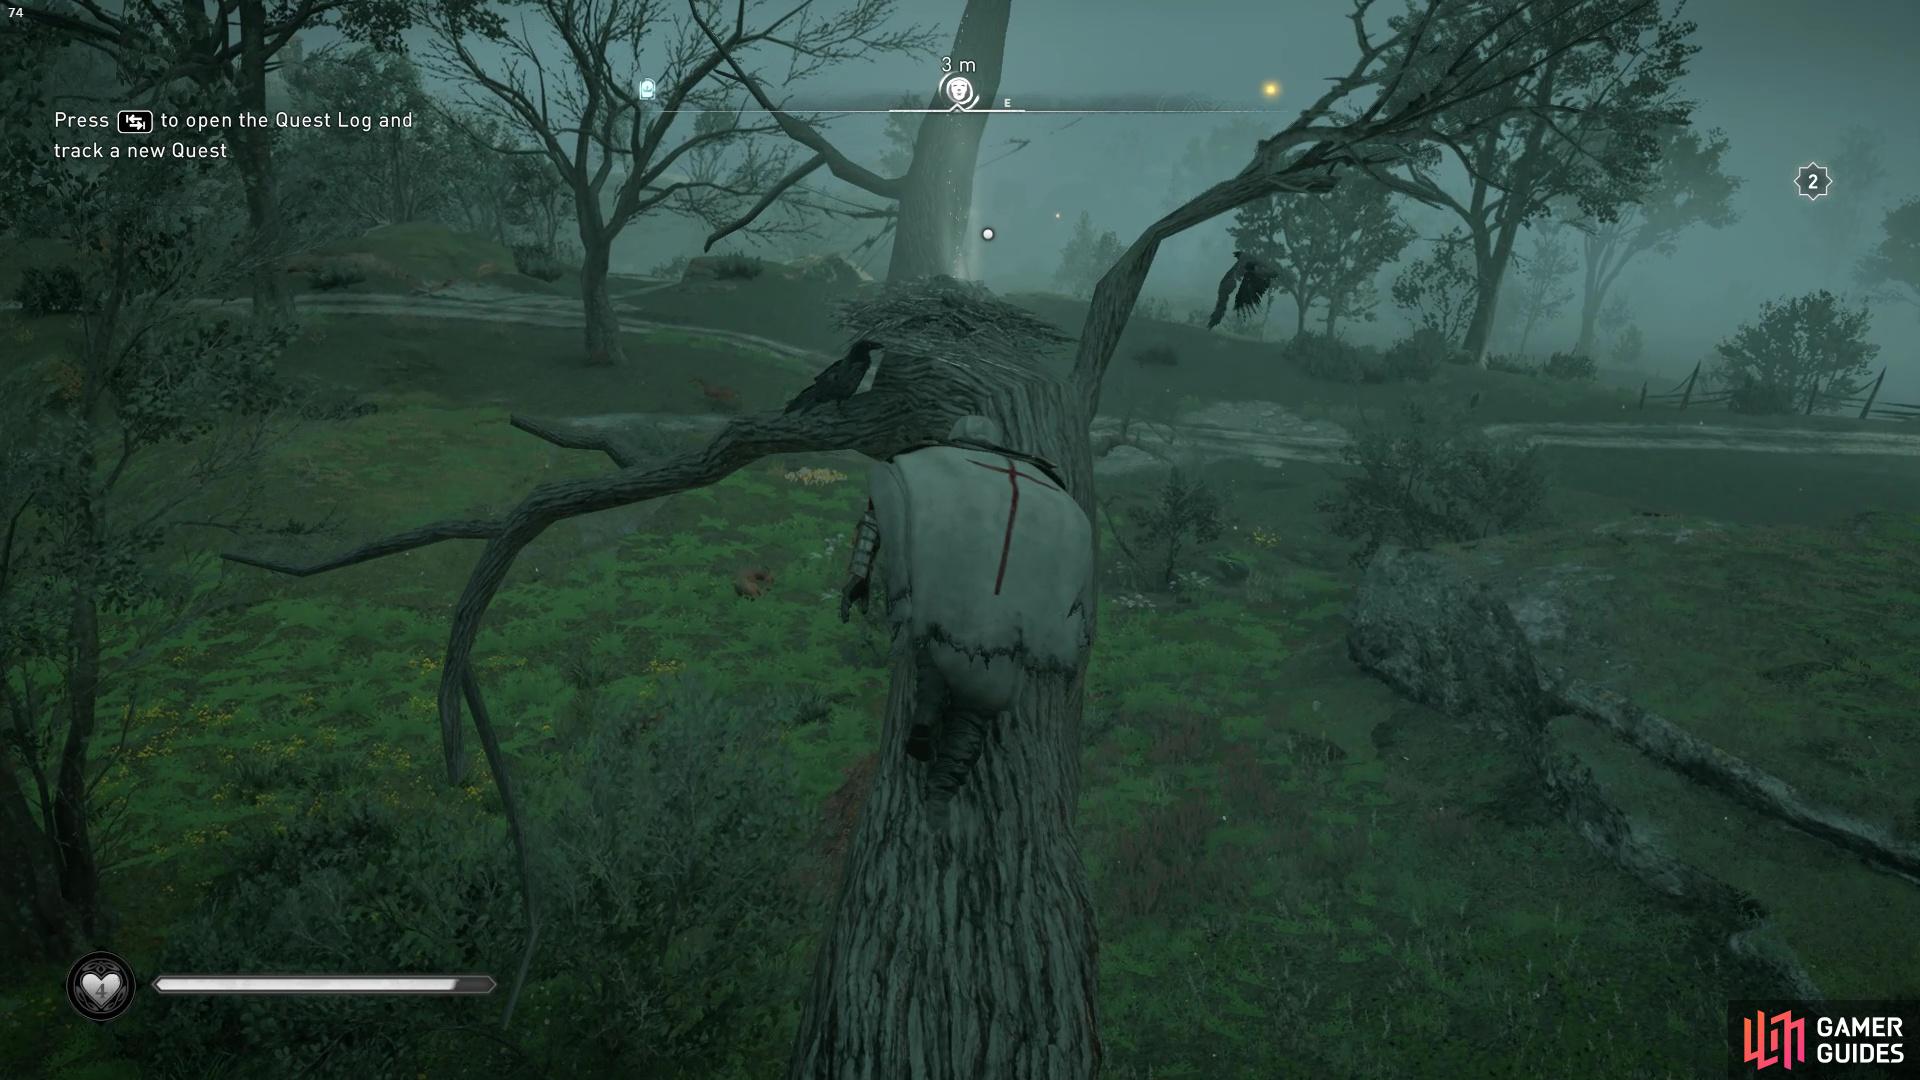 youll need to climb the tree and collect the artifact from a birds nest.